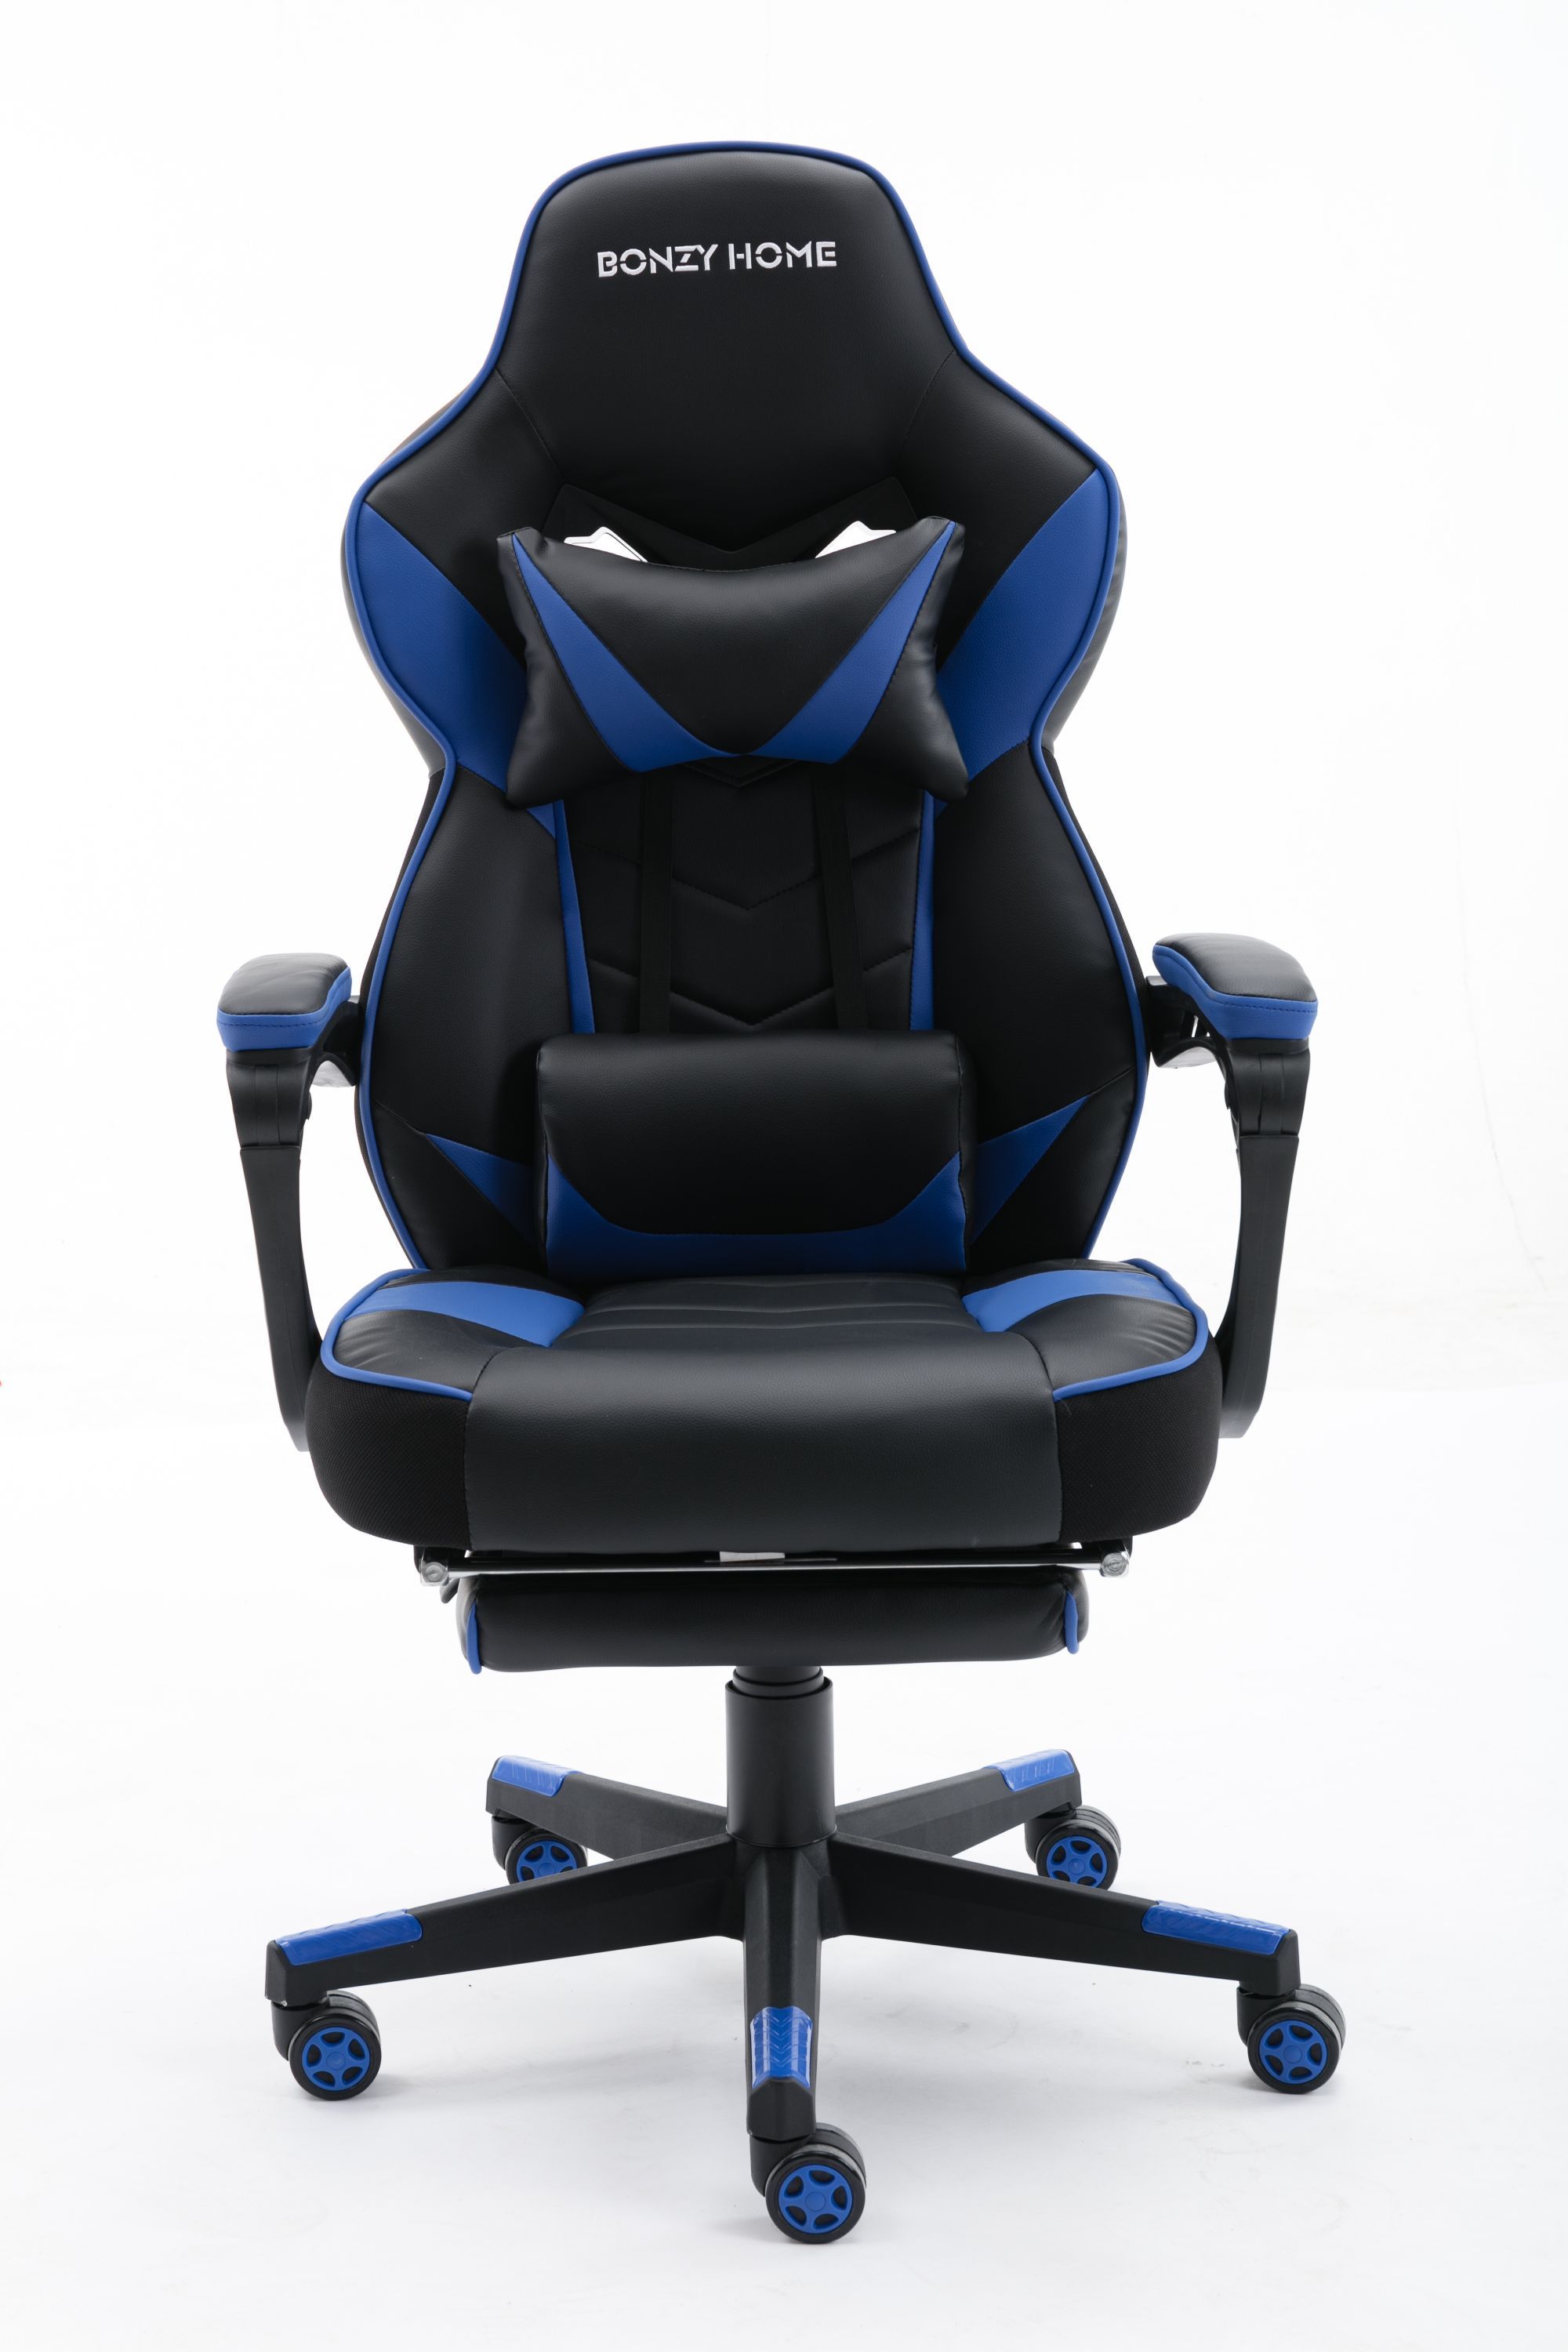 Details about   Computer Gaming Chair PU Leather Recliner Office Desk Seat Swivel with Footrest 